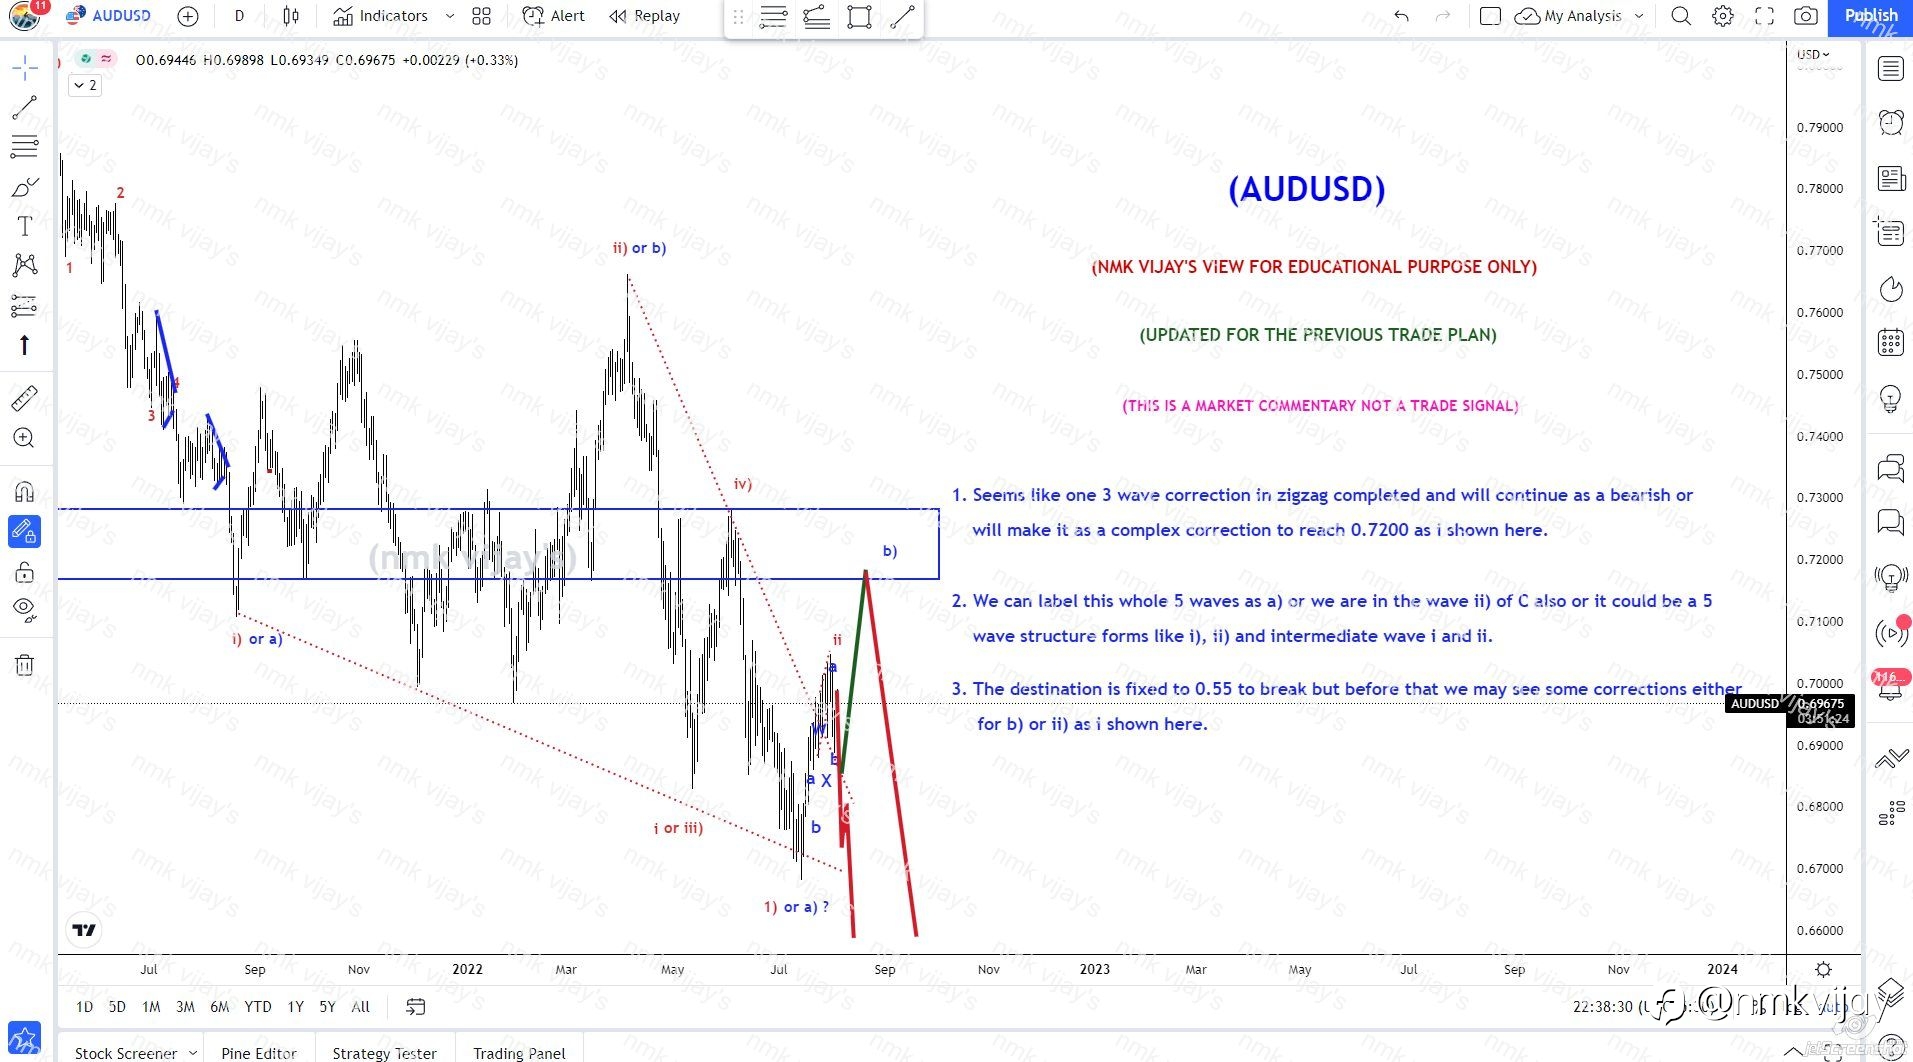 AUDUSD-Destination is fixed but correction has to end...